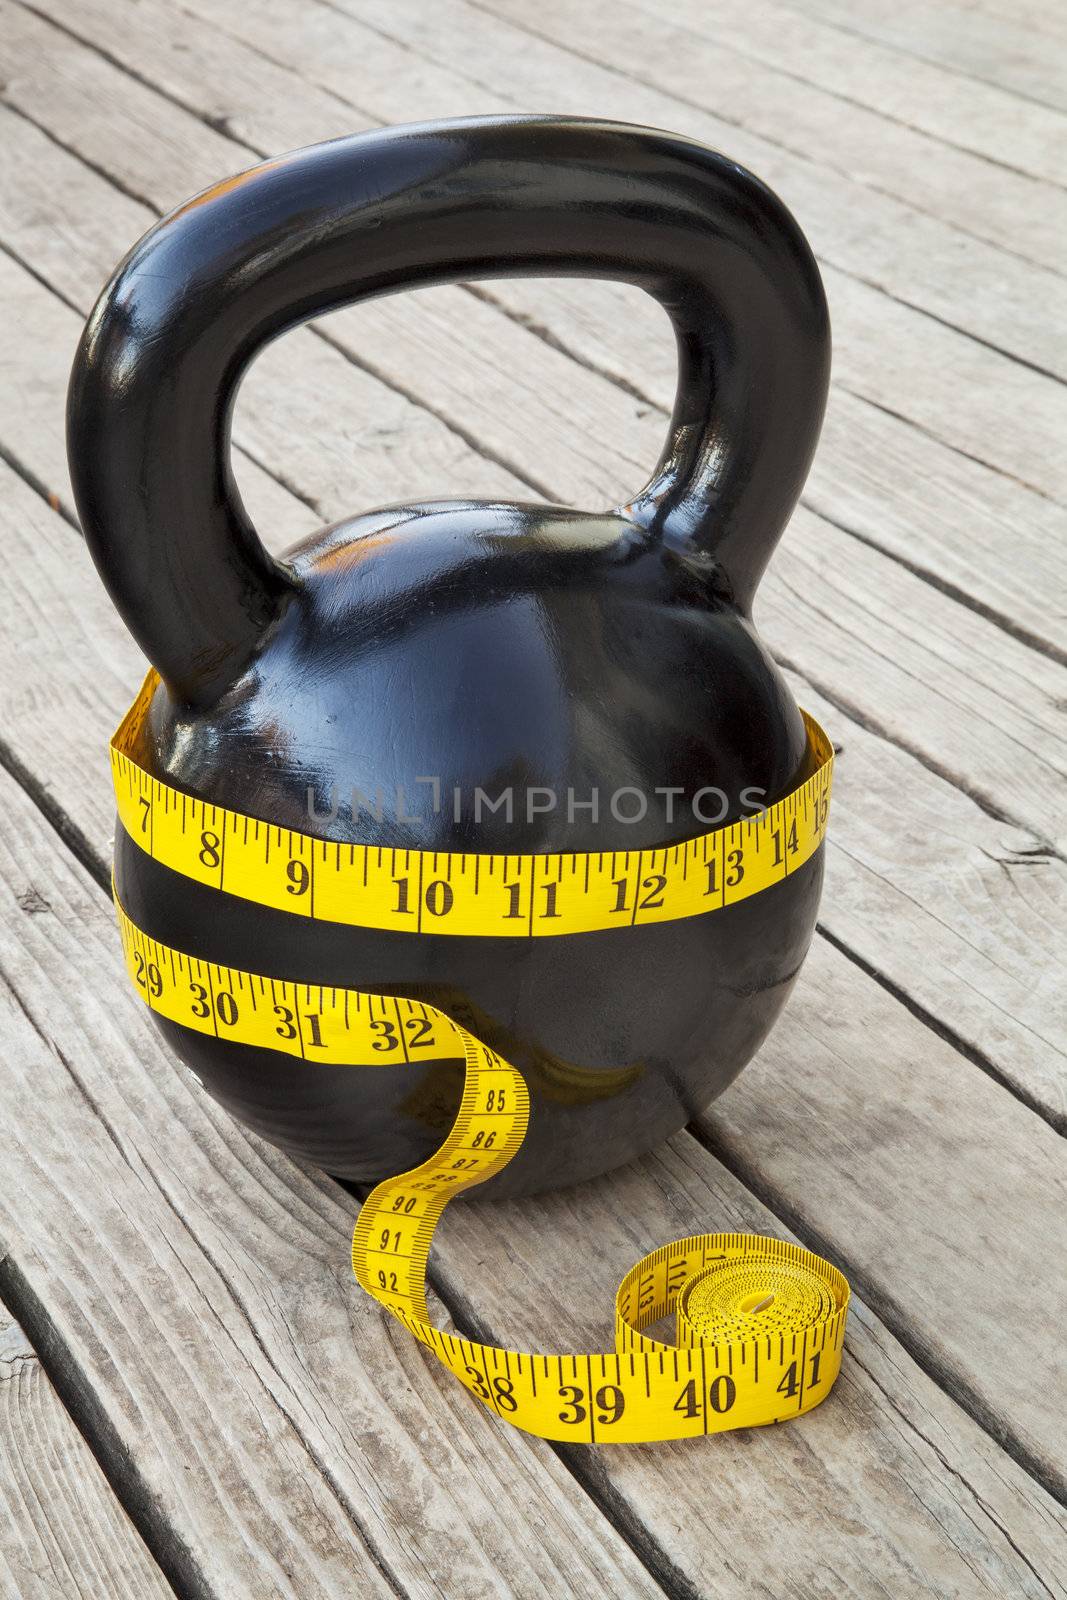 kettlebell and measuring tape by PixelsAway